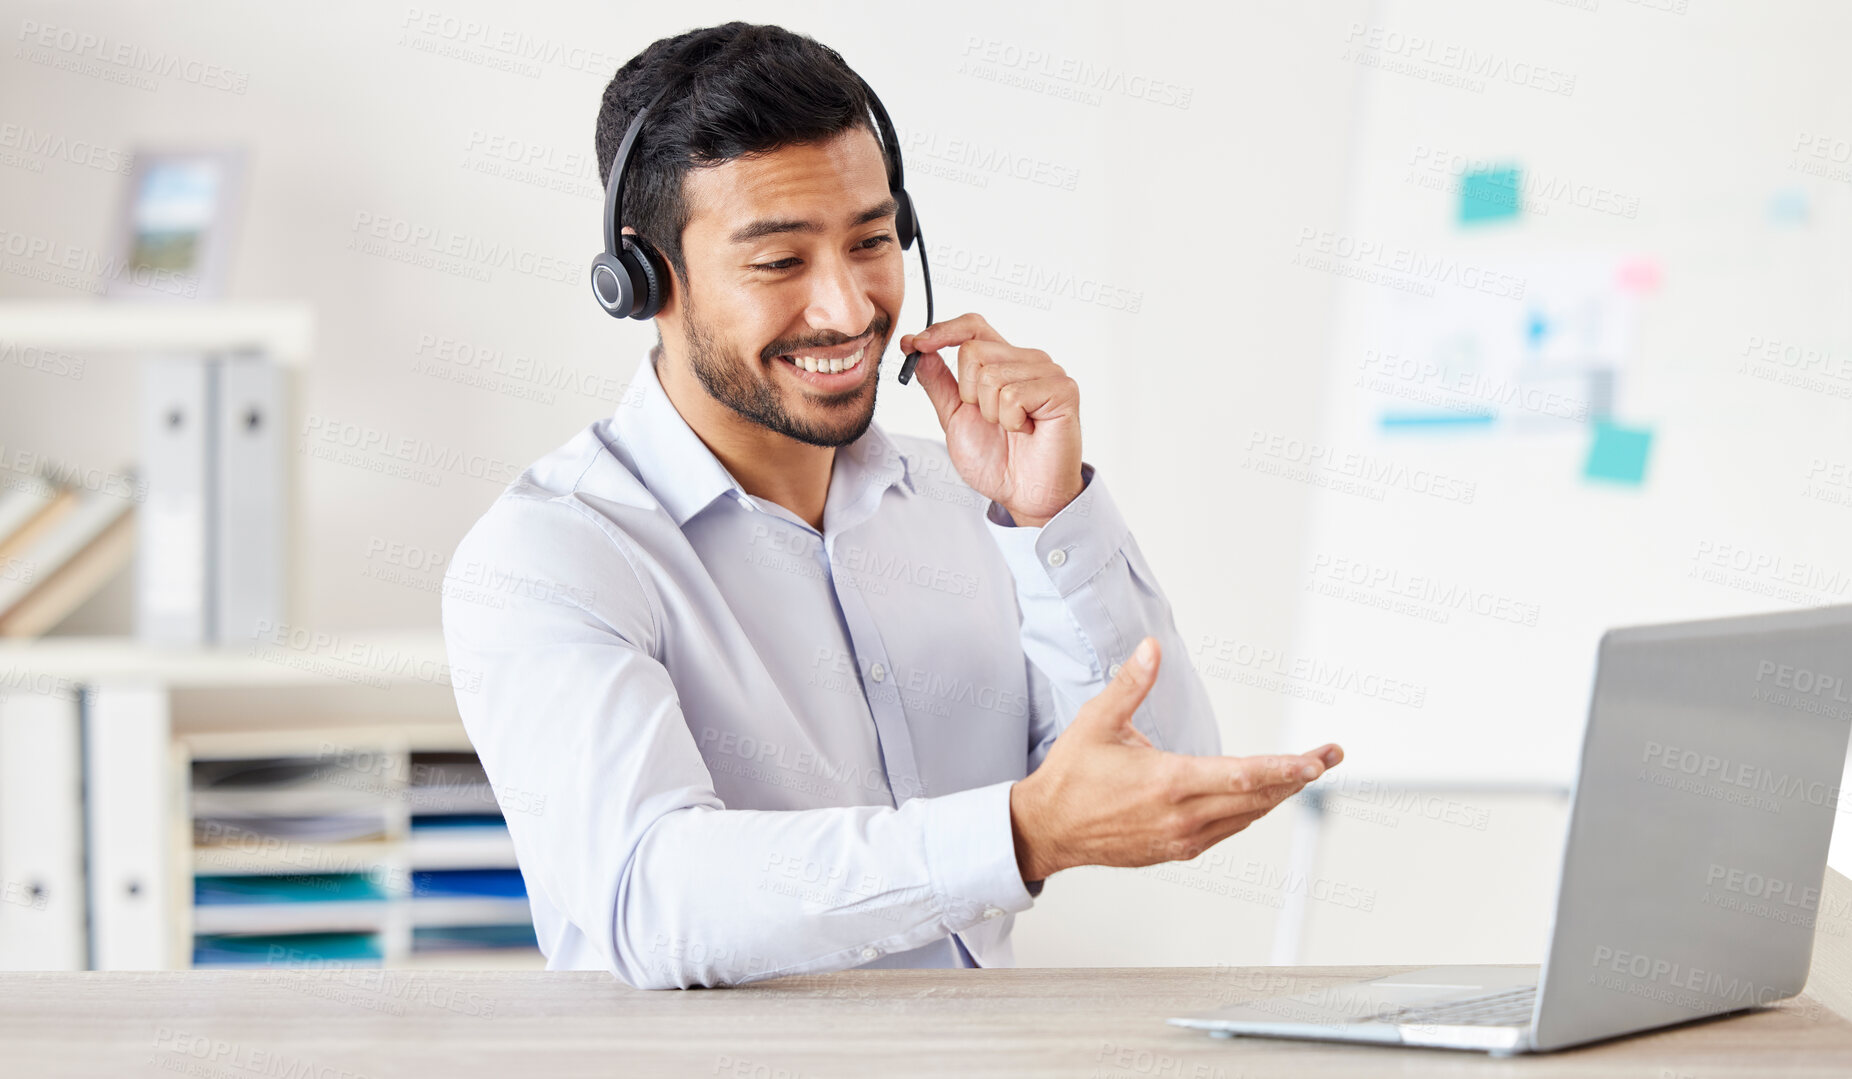 Buy stock photo Consultant, man with a headset and laptop at his desk of a modern office workplace. Telemarketing or customer service, crm or online communication and male call center agent happy at workstation